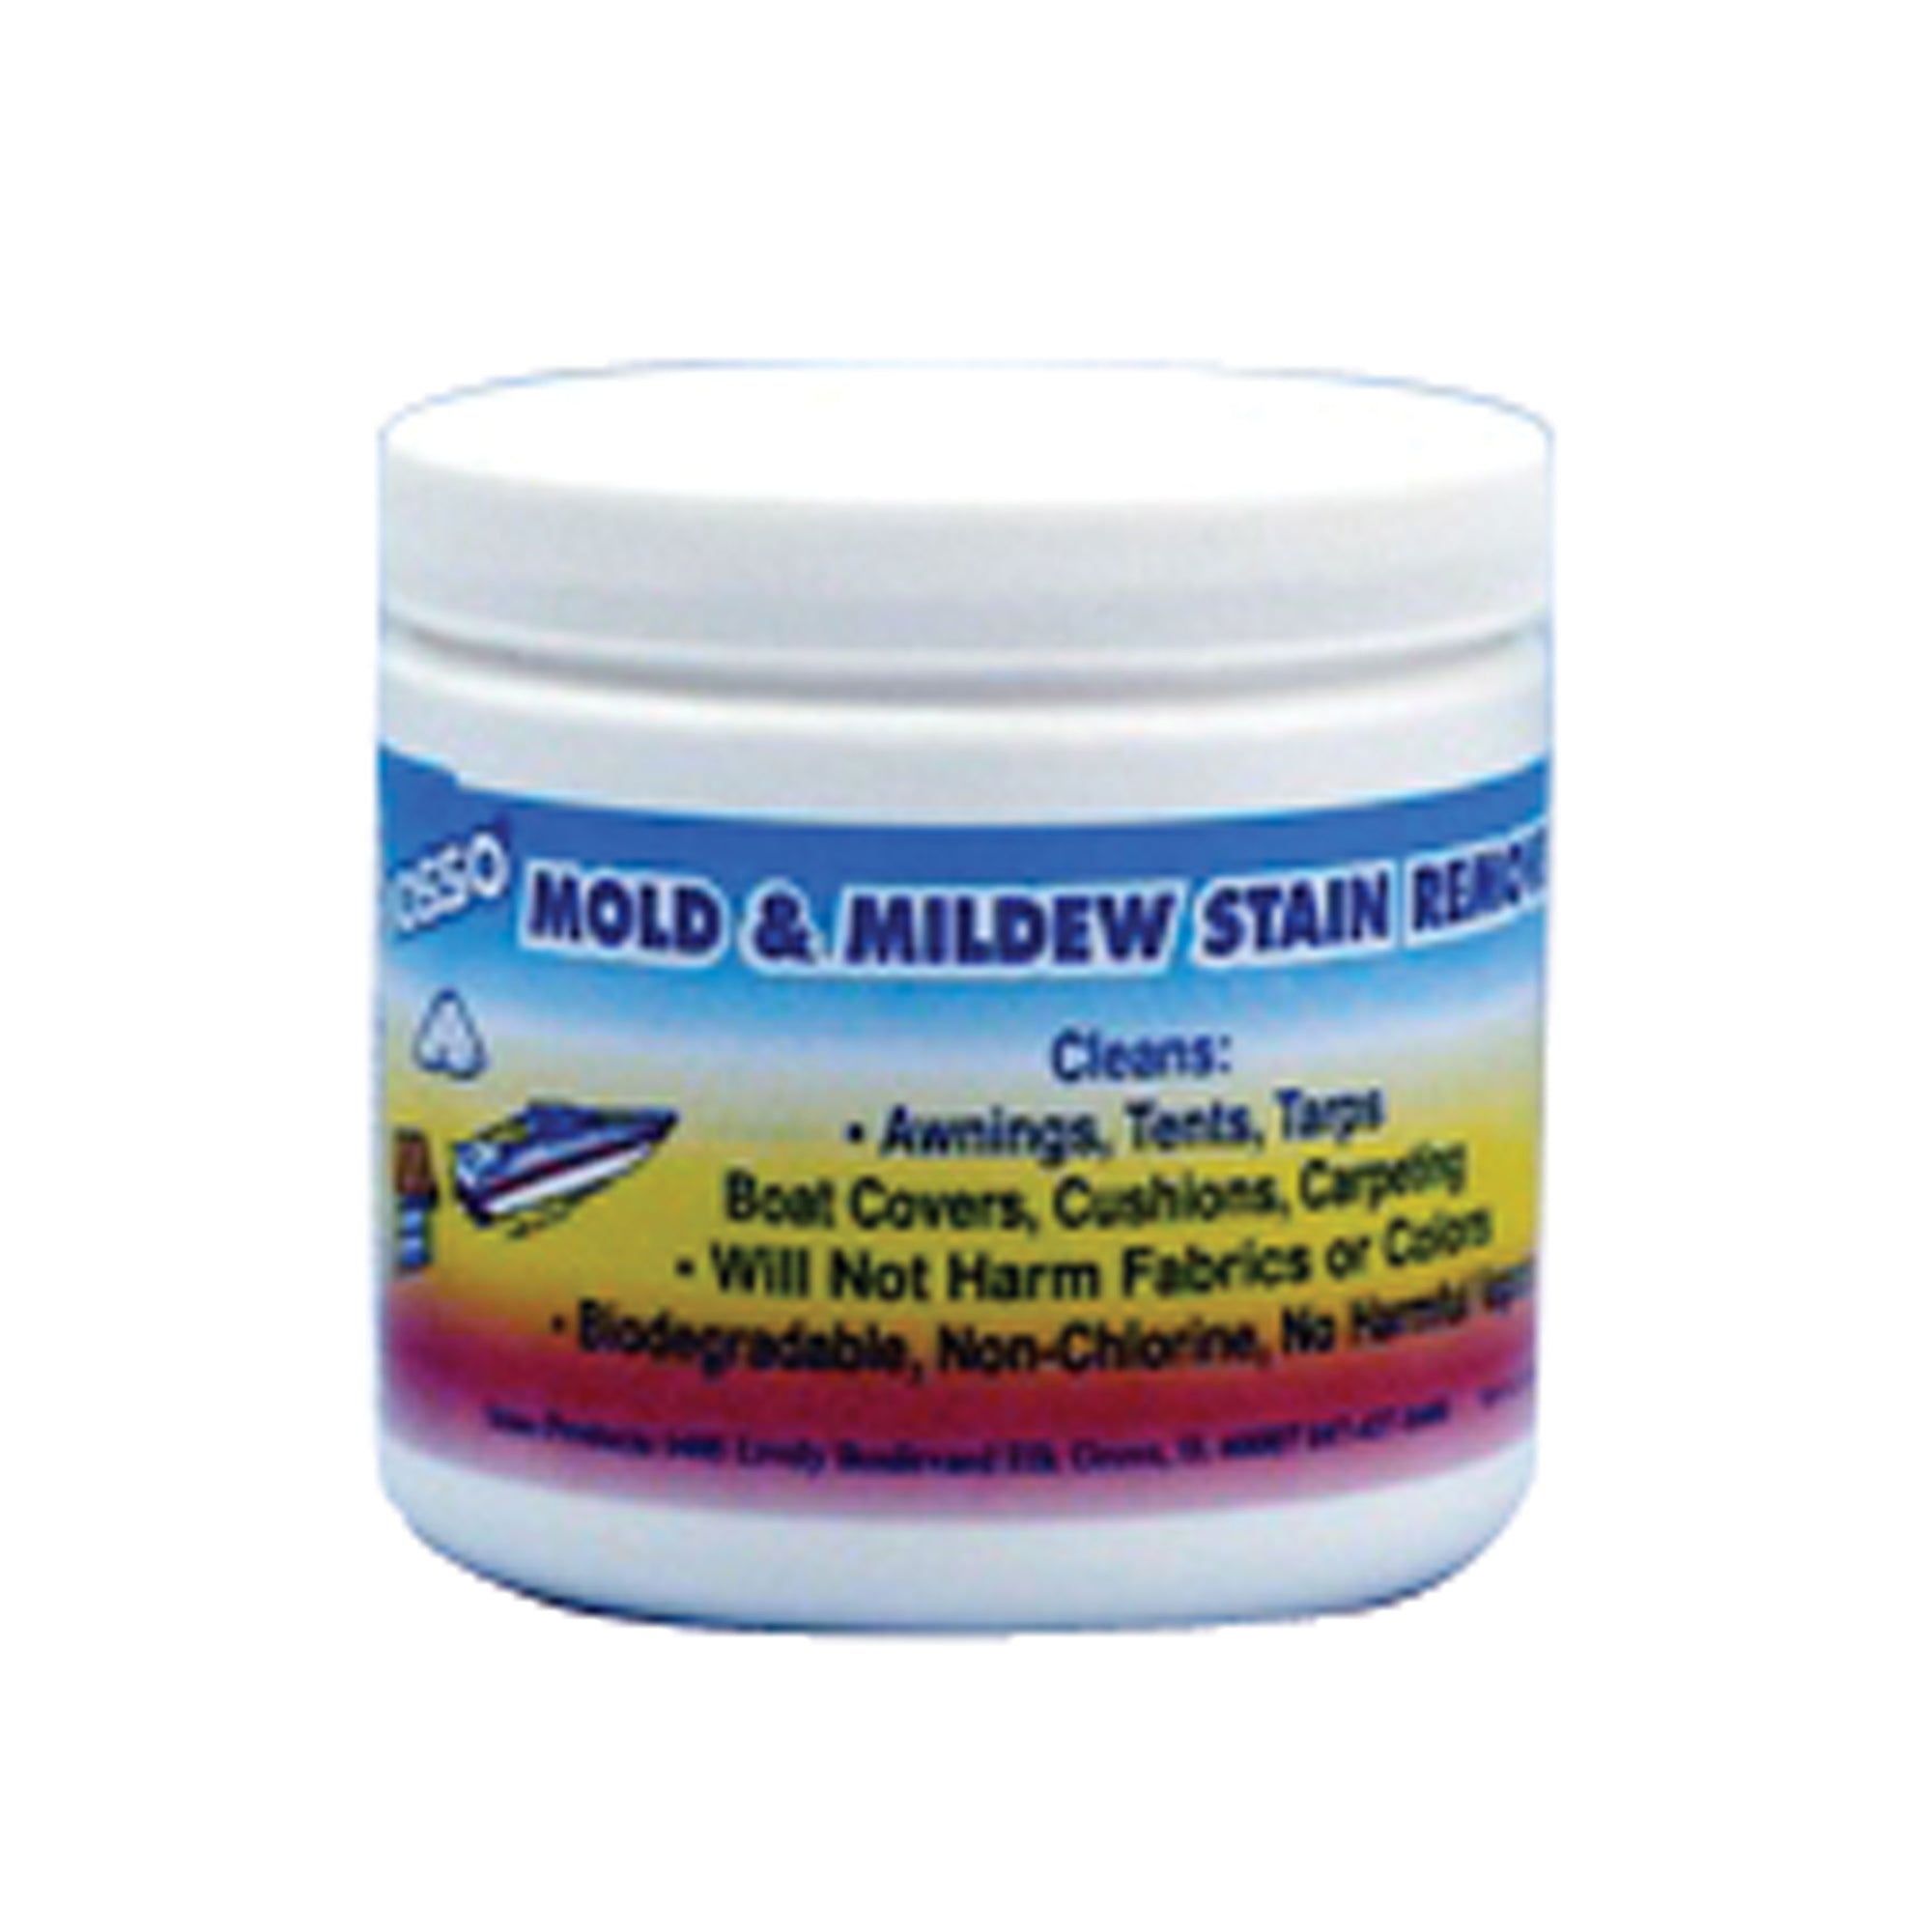 Iosso 10900 Mold and Mildew Stain Remover - 12 oz.